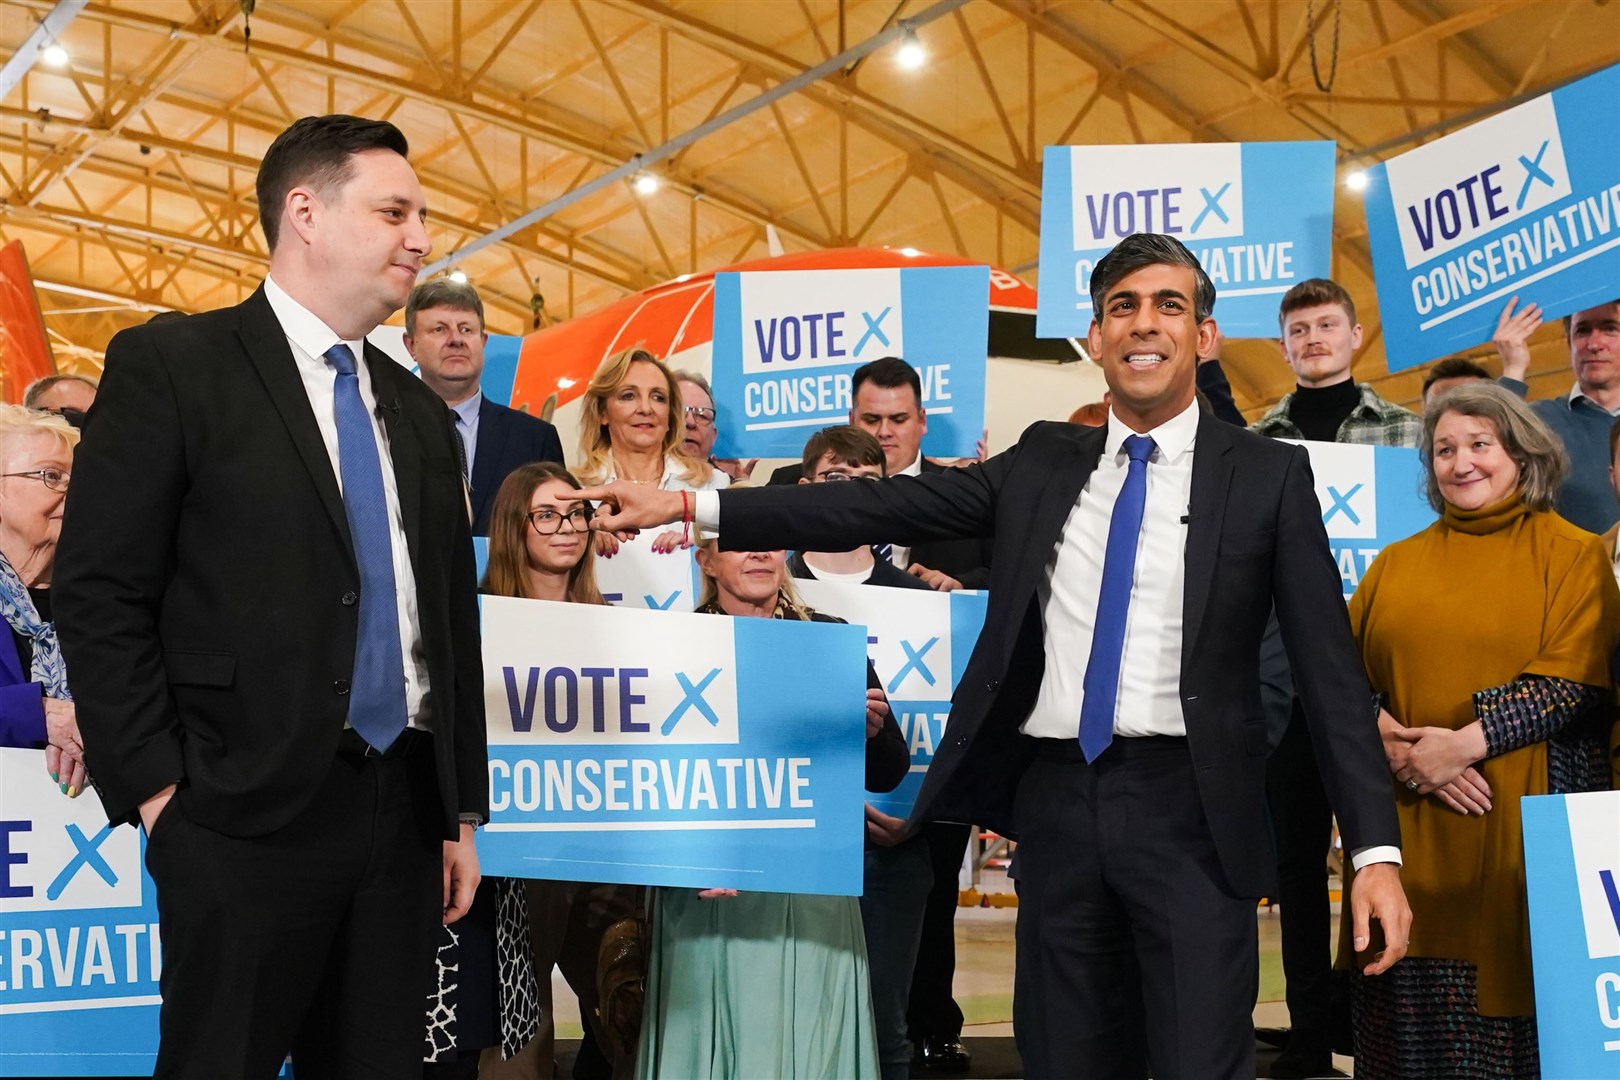 Rishi Sunak said the results had been ‘disappointing’ but hailed his party’s victory in Tees Valley (Owen Humphreys/PA)